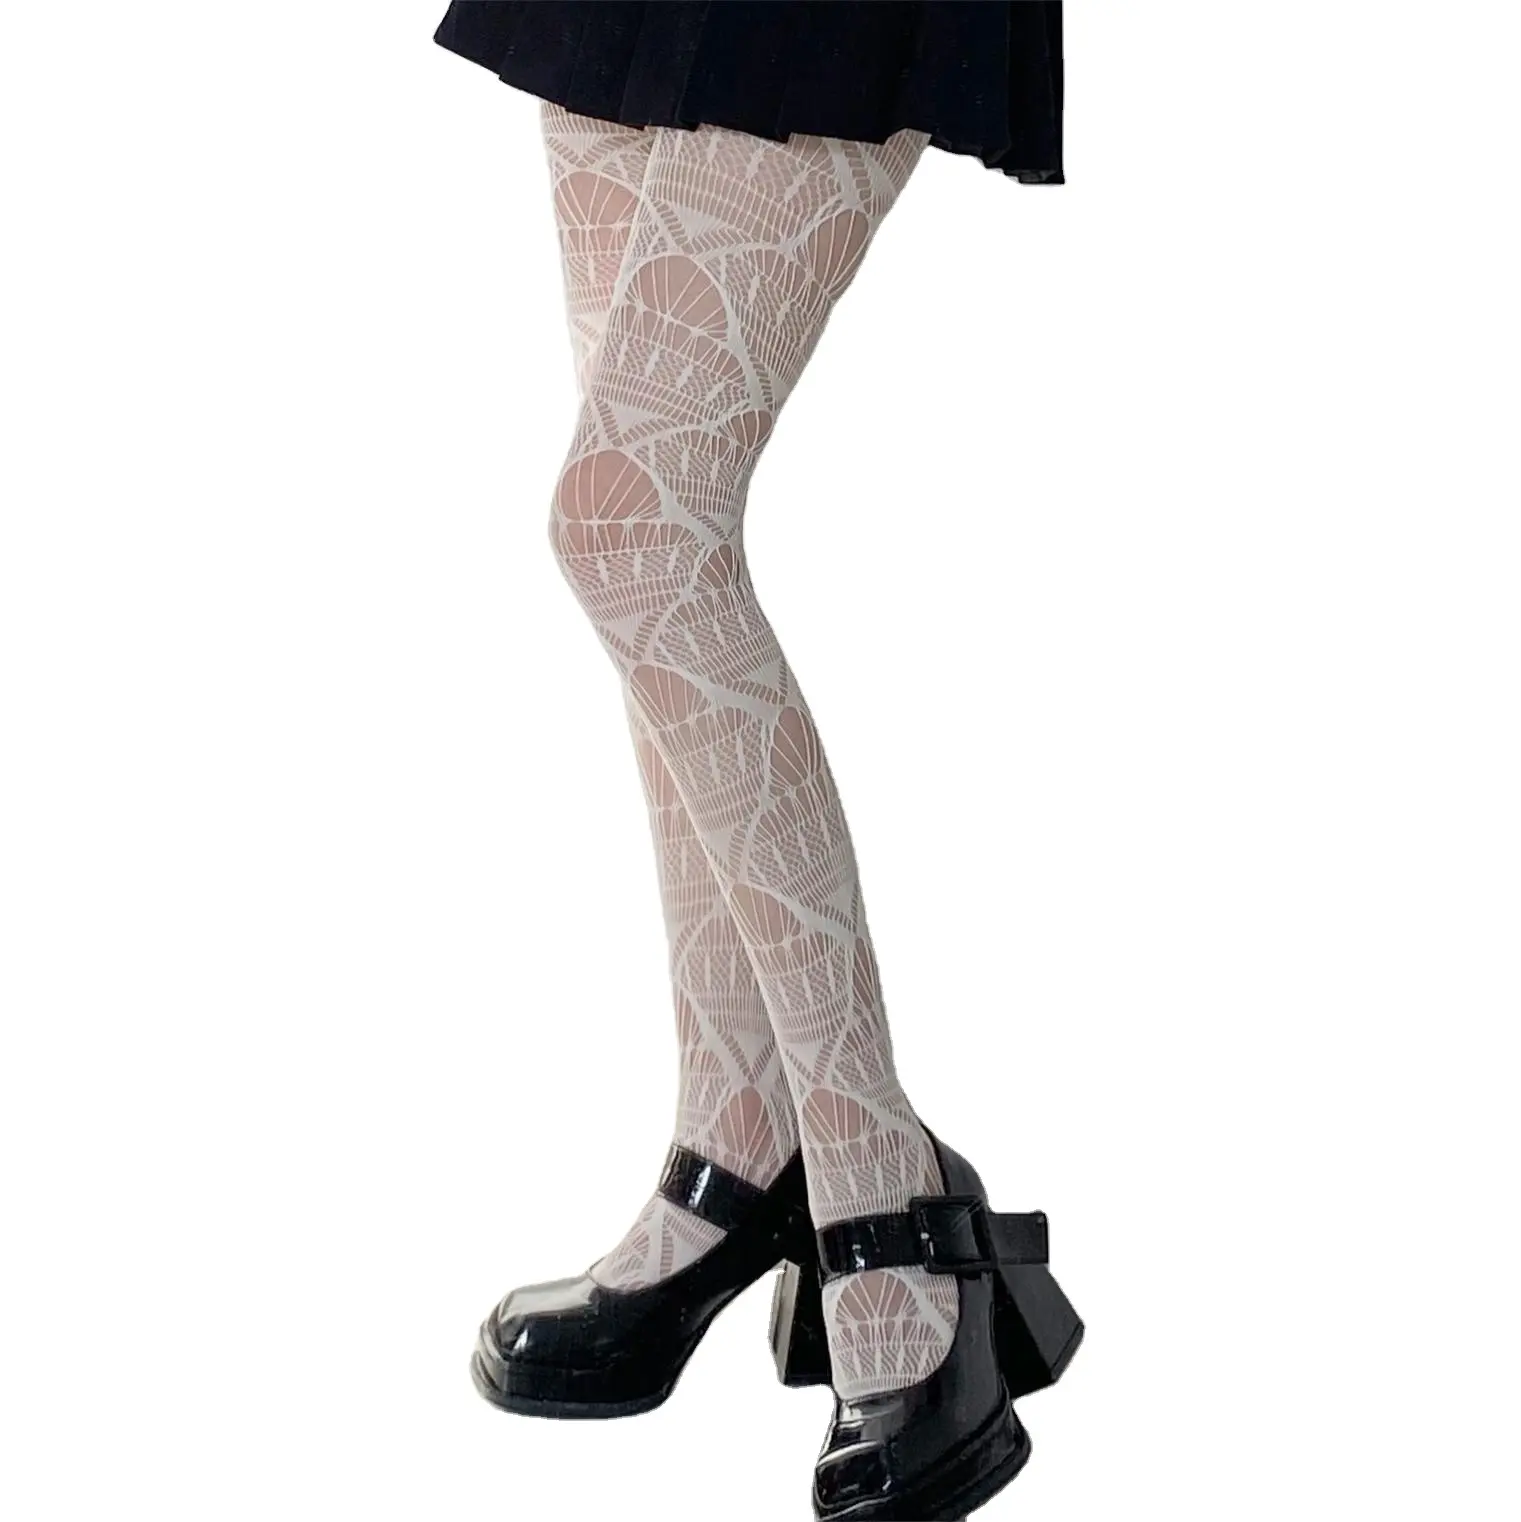 White Red Hollow-carved Design Pantyhose Tights Wholesale Sexy Fishnet Stylish Lace Personality Dress Stockings Women's Hosiery